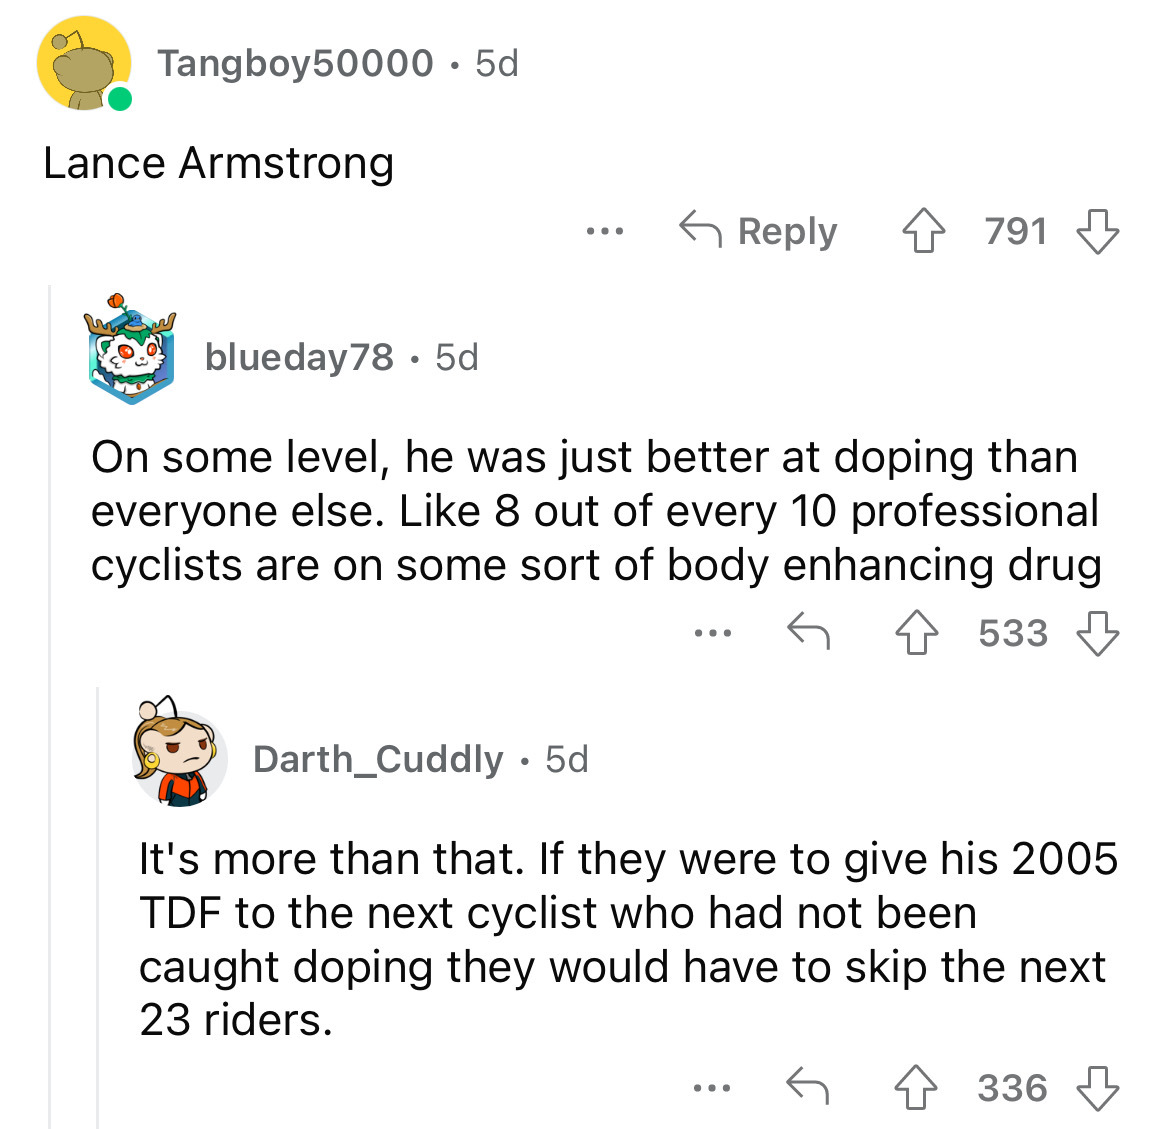 angle - Tangboy50000 5d Lance Armstrong blueday78 5d ... On some level, he was just better at doping than everyone else. 8 out of every 10 professional cyclists are on some sort of body enhancing drug 533 ... 4791 Darth_Cuddly. 5d It's more than that. If 